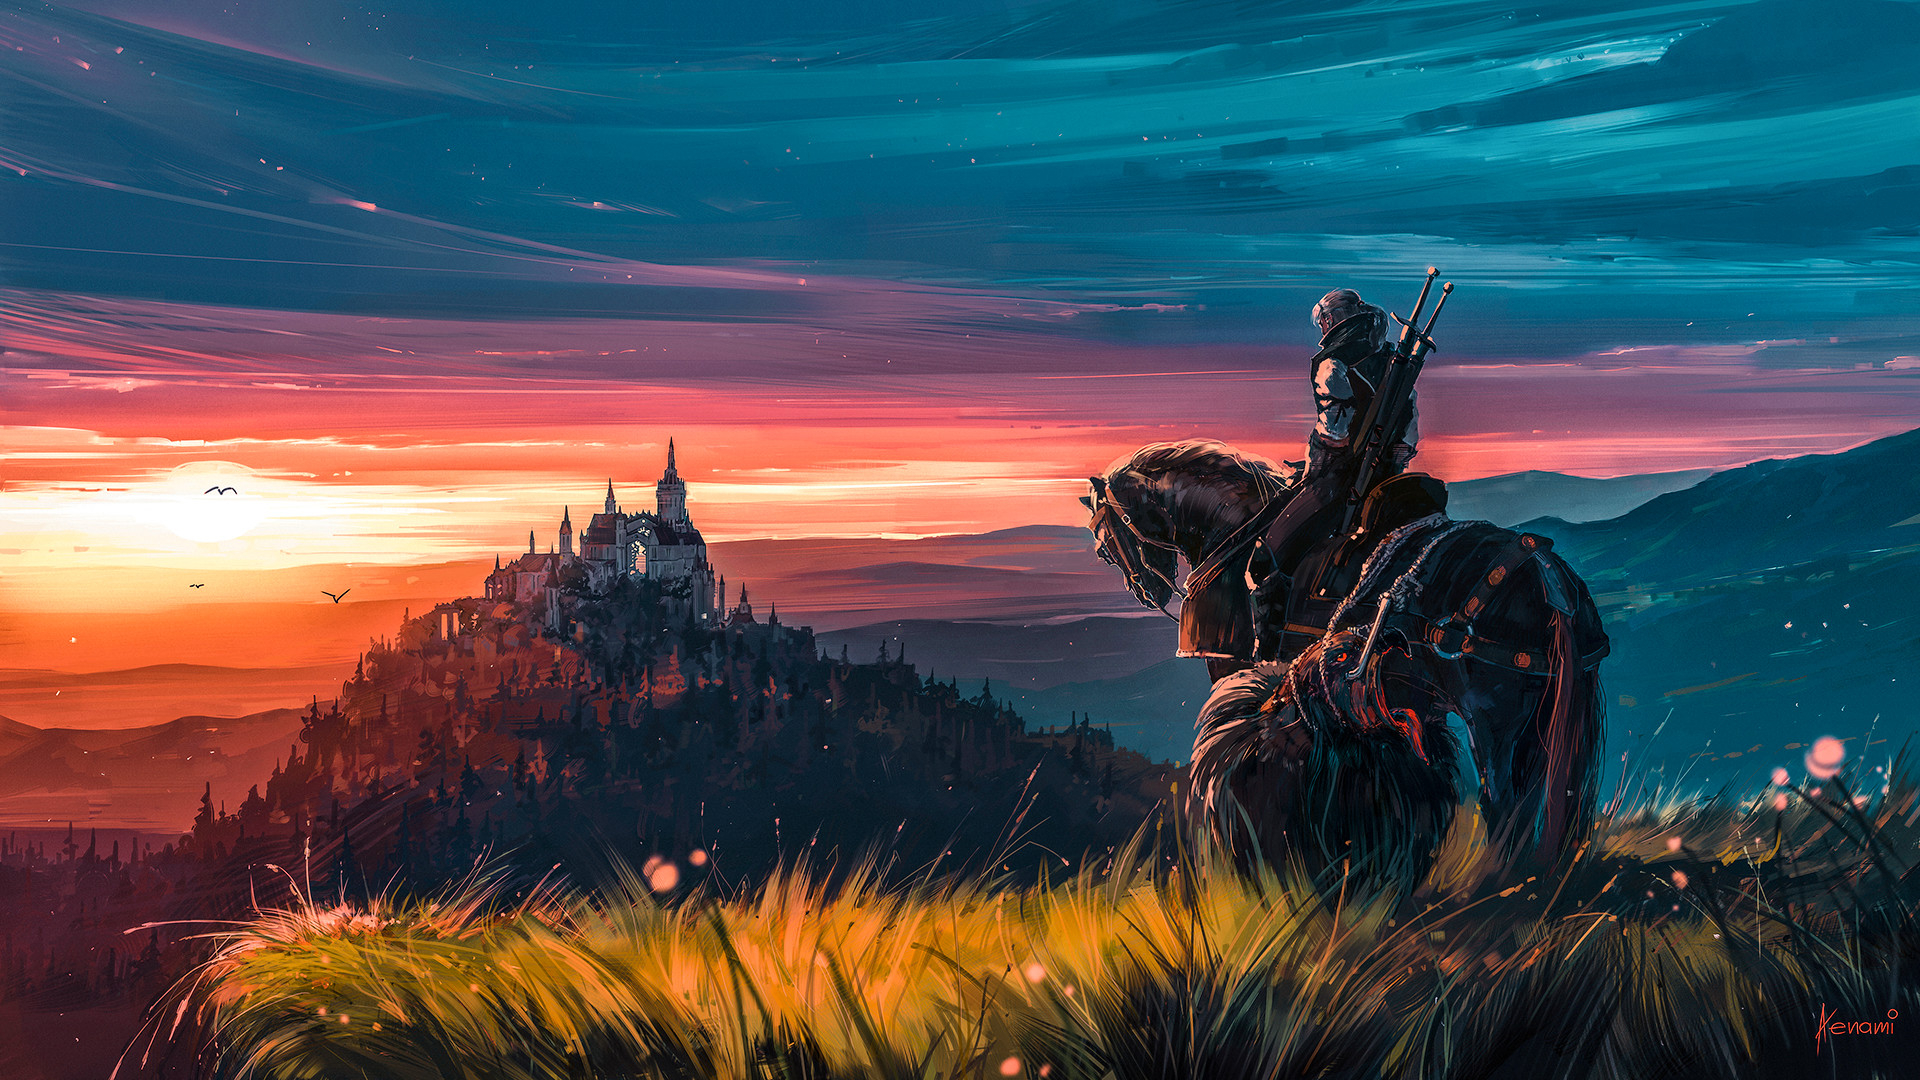 1920x1080 1200+ The Witcher HD Wallpapers and Backgrounds